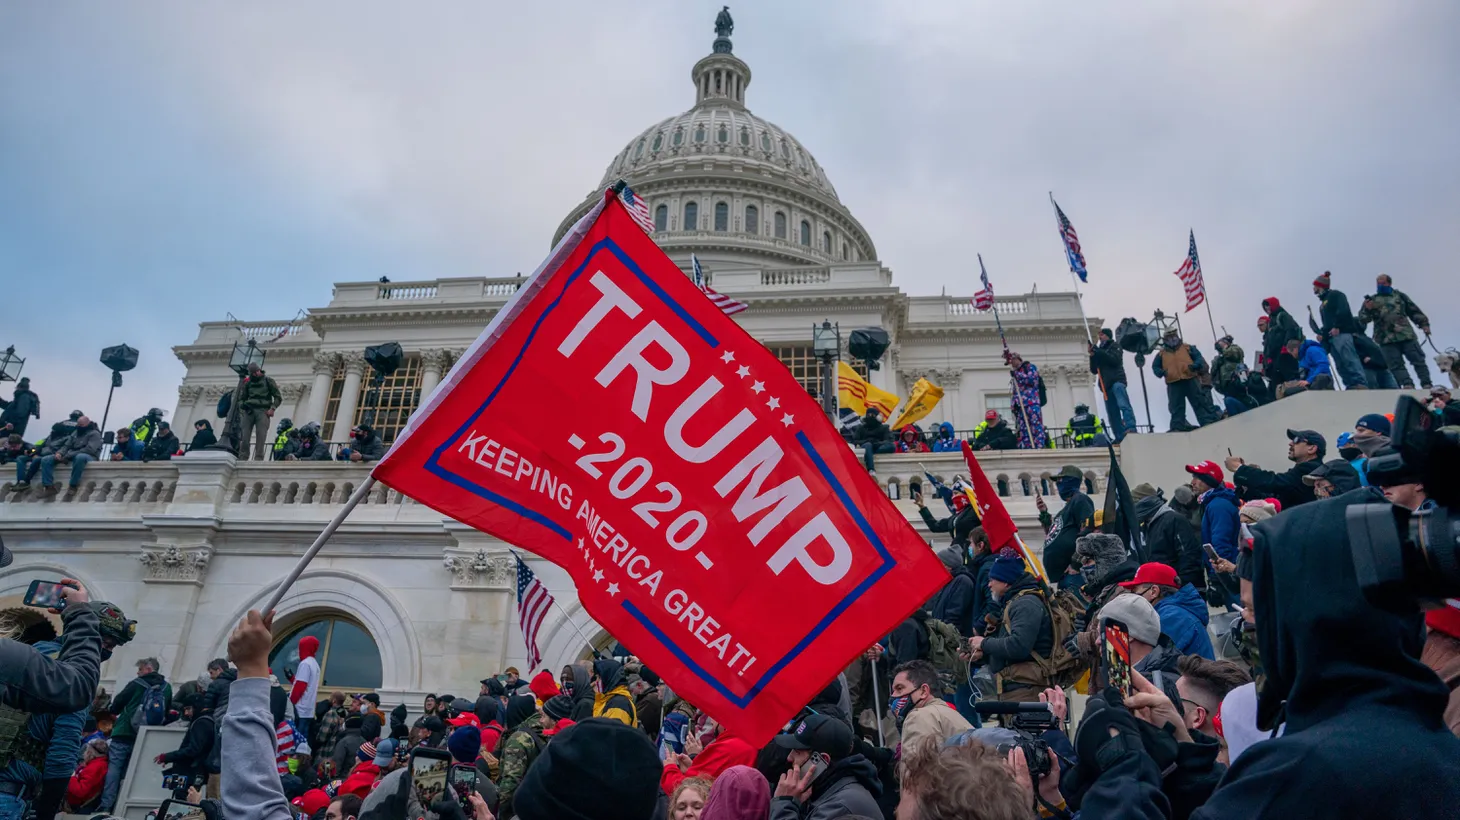 President Donald Trump’s supporters storm the United States Capitol building on January 6, 2021.